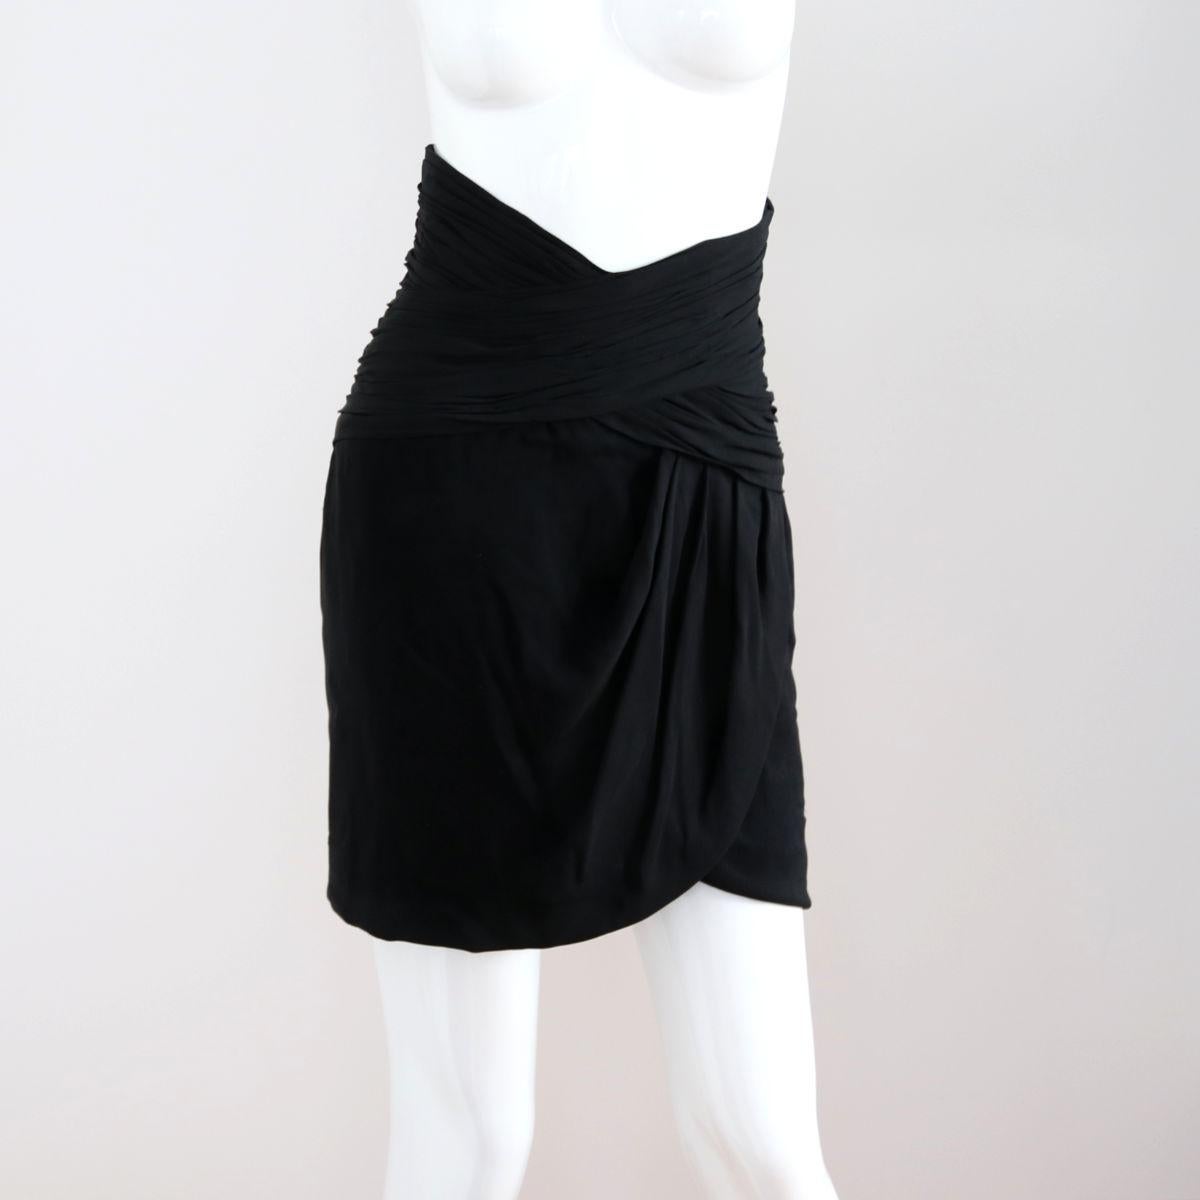 Women's CHANEL 1996 Black Skirt With High Waist & Button Placket by Karl Lagerfeld